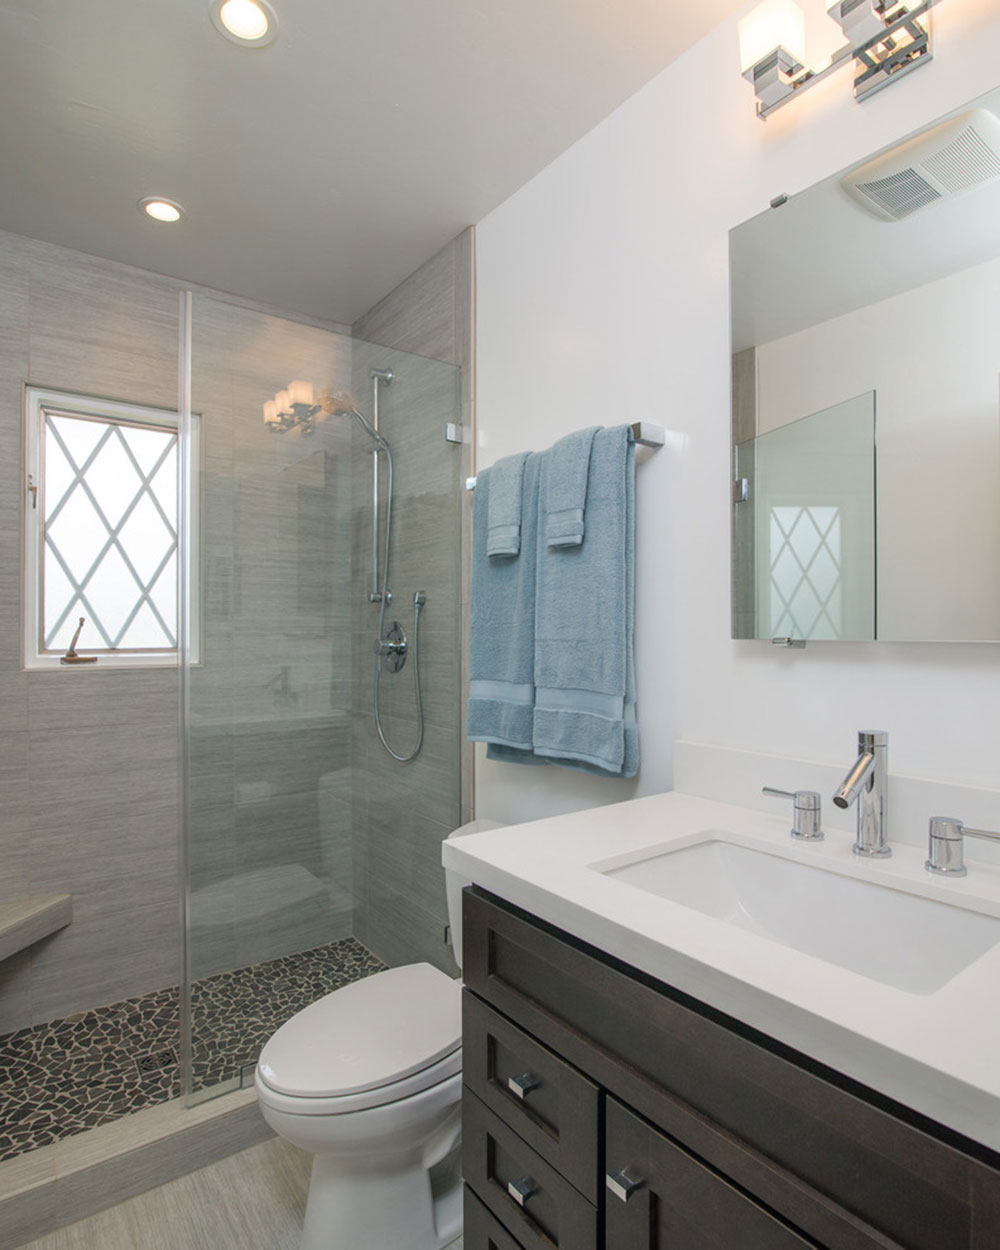 Rancho-Santa-Fe-Bathroom-Remodel-by-Remodel-Works-Bath-Kitchen The definitive guide on how to decorate a bathroom